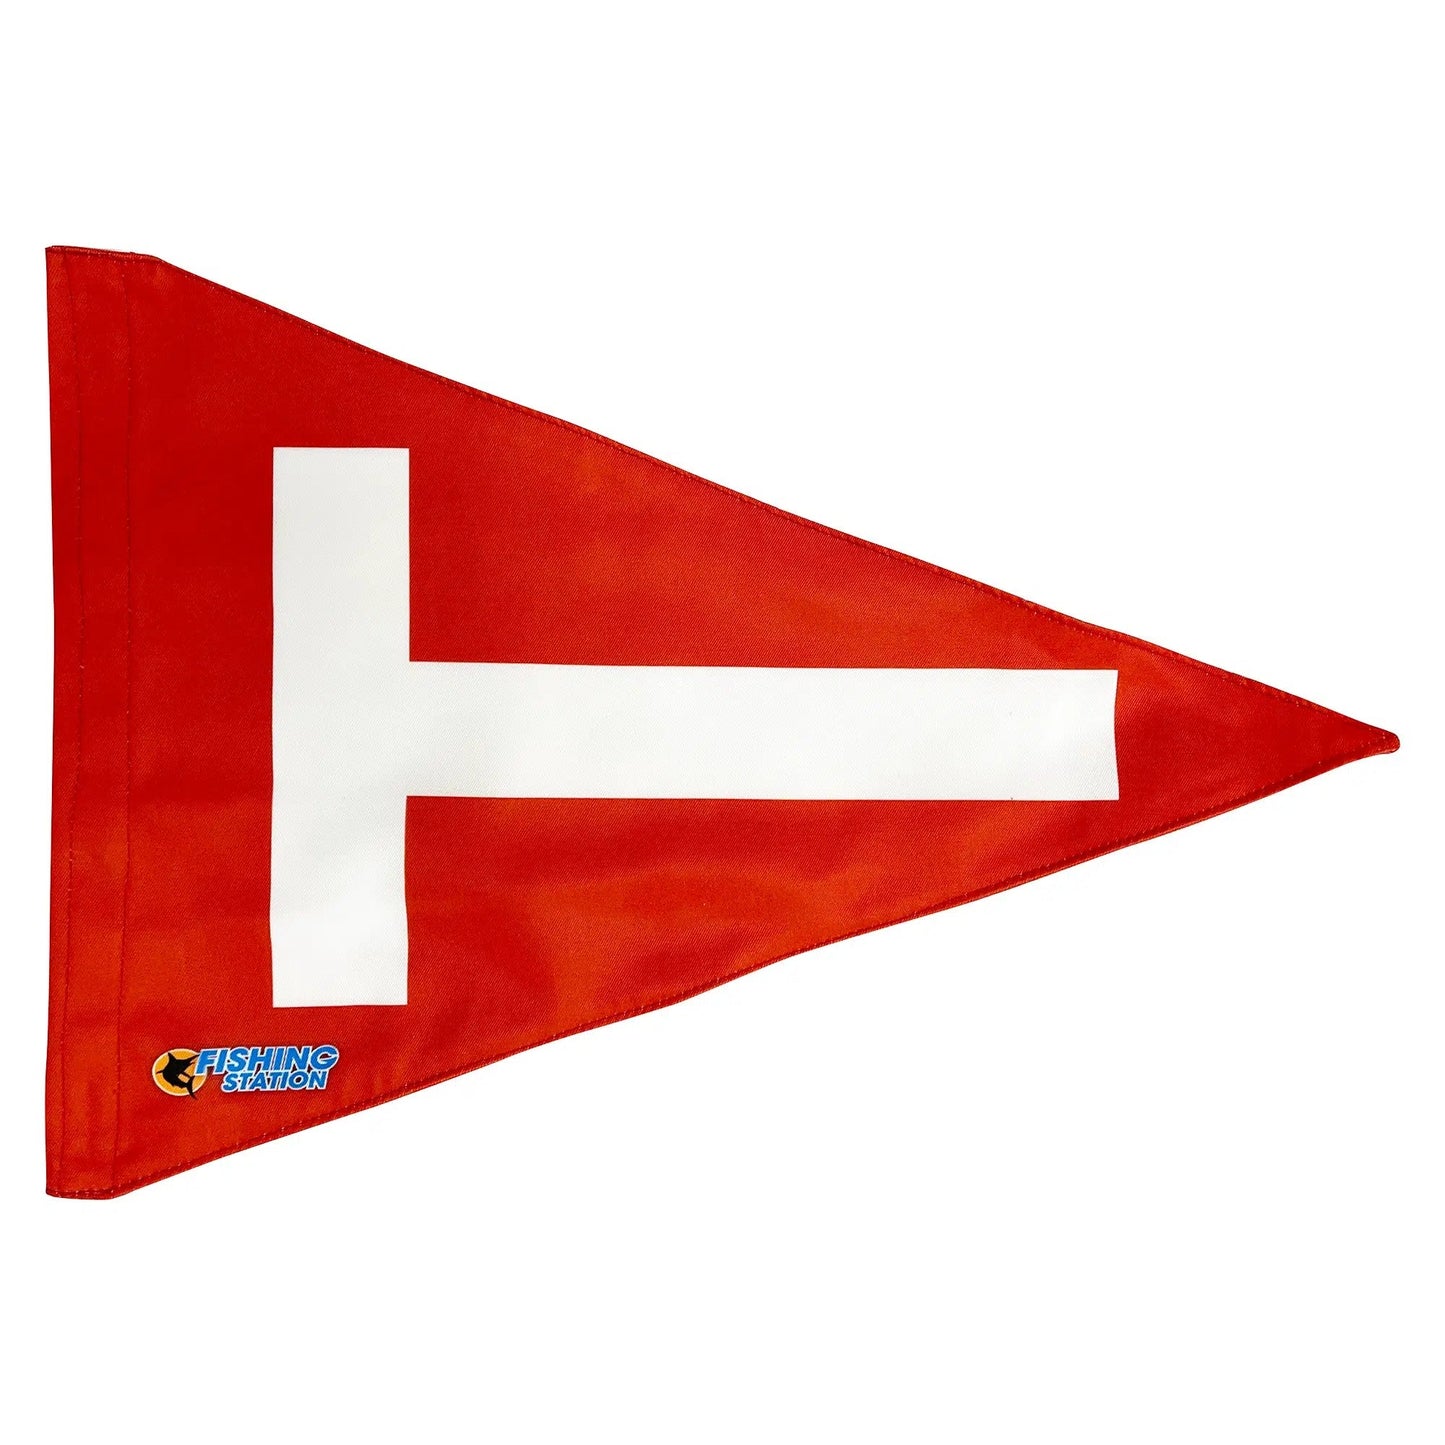 Fishing Station Tag Flags-Accessories - Game Fishing-Undertow-Tag Flag Red-Fishing Station